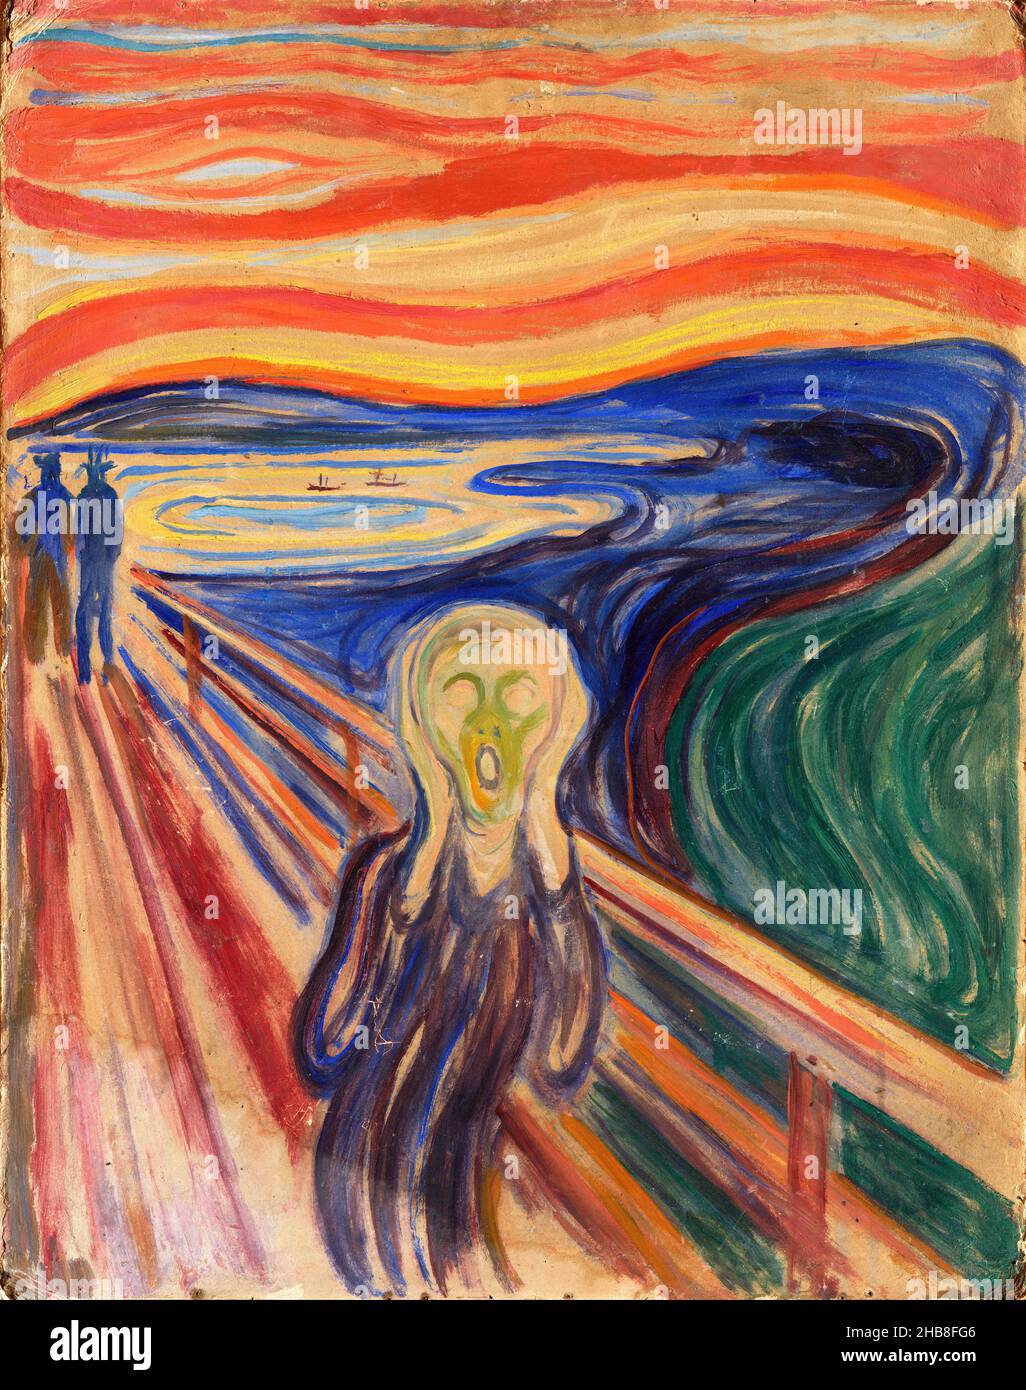 The Scream (Skrik) by Edvard Munch (1863-1944), tempera and oil on unprimed cardboard, 1910. The Munch Museum version. Stock Photo